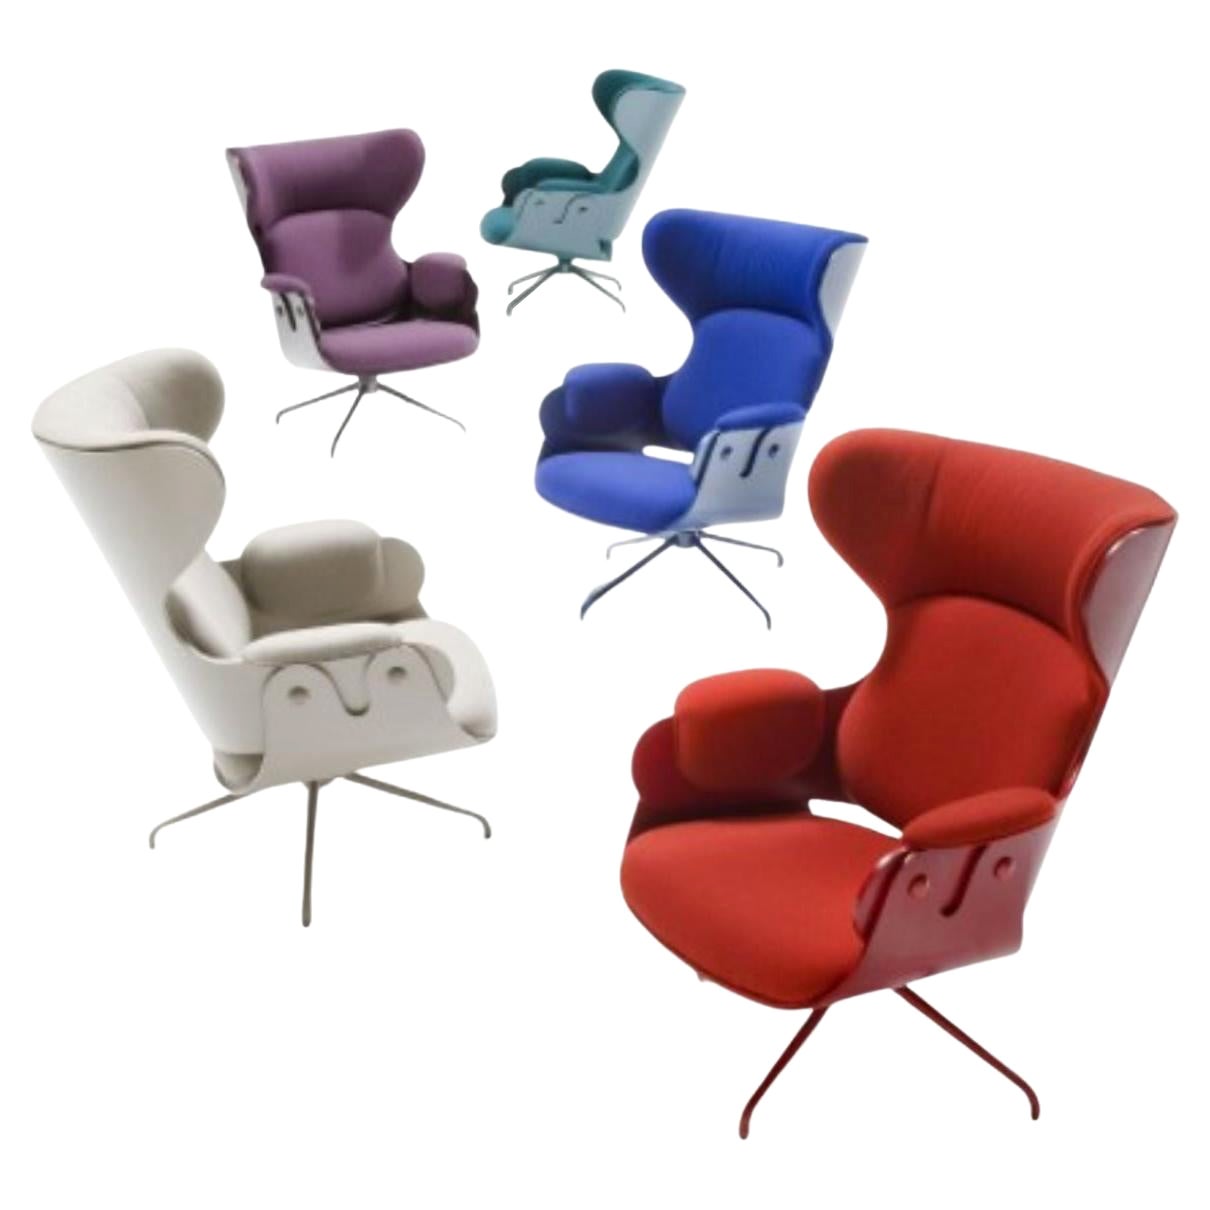 Set of 5 Lounger Armchair by Jaime Hayon For Sale